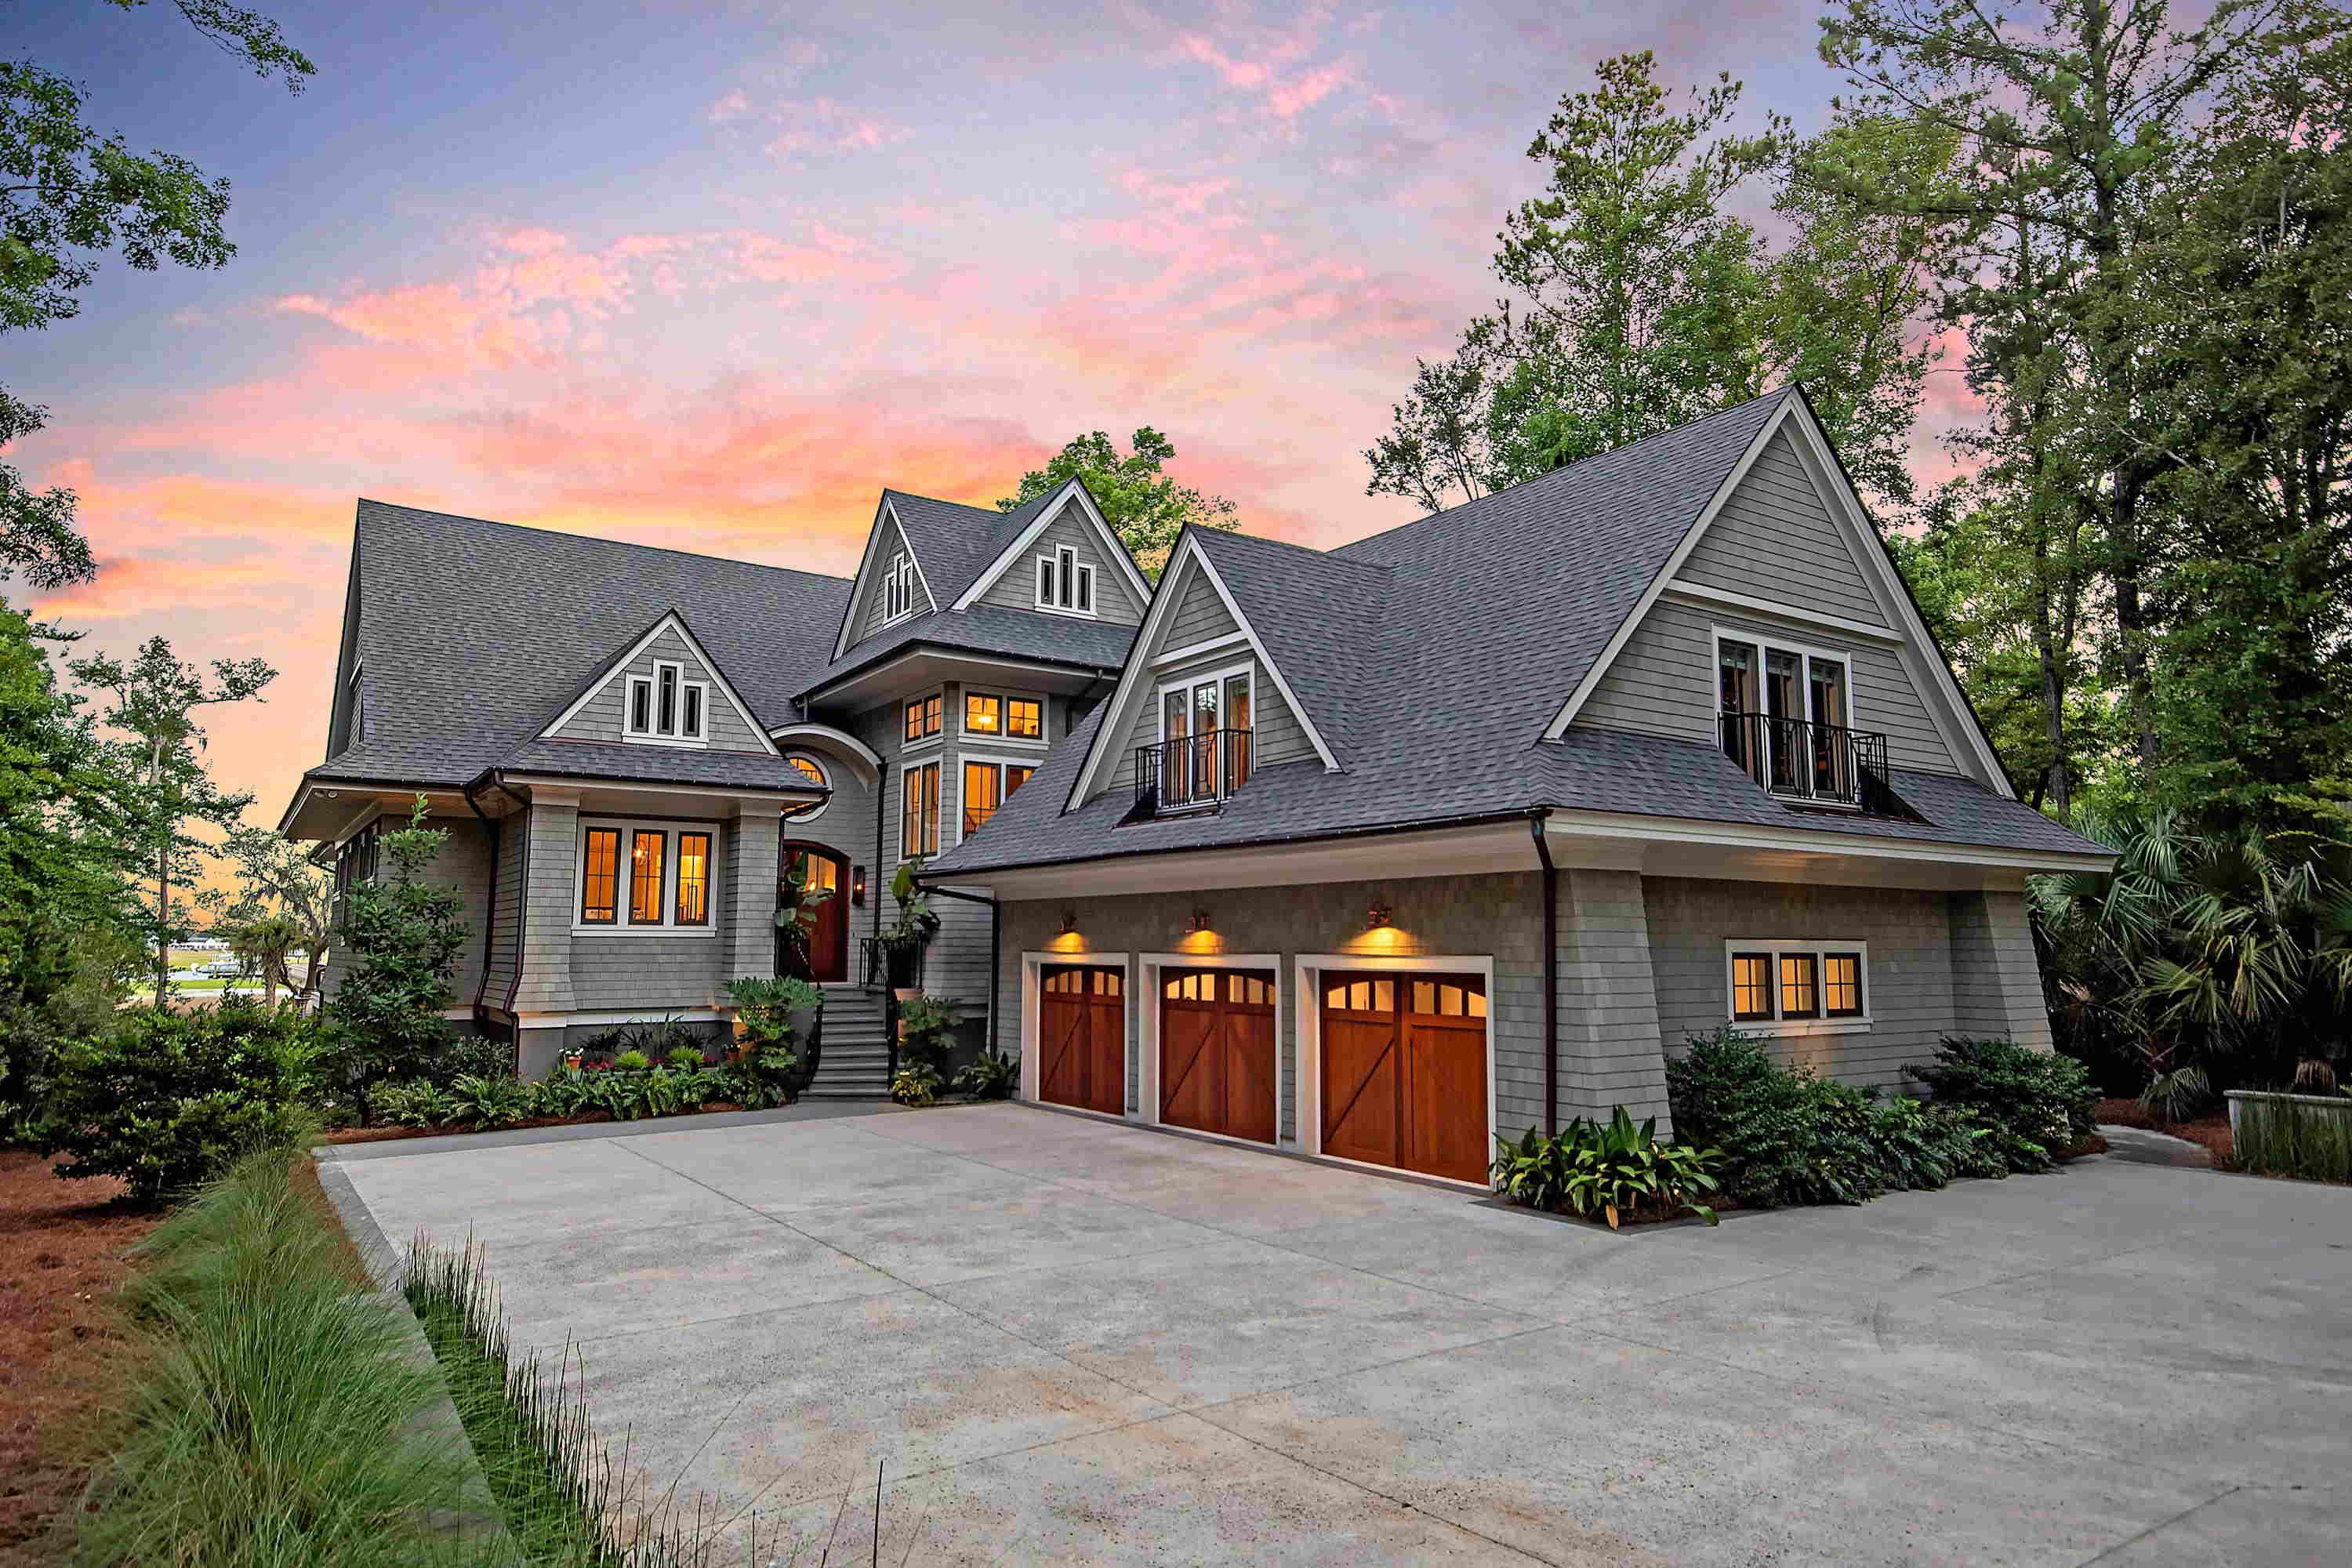 Luxury Home in west ashley at dusk